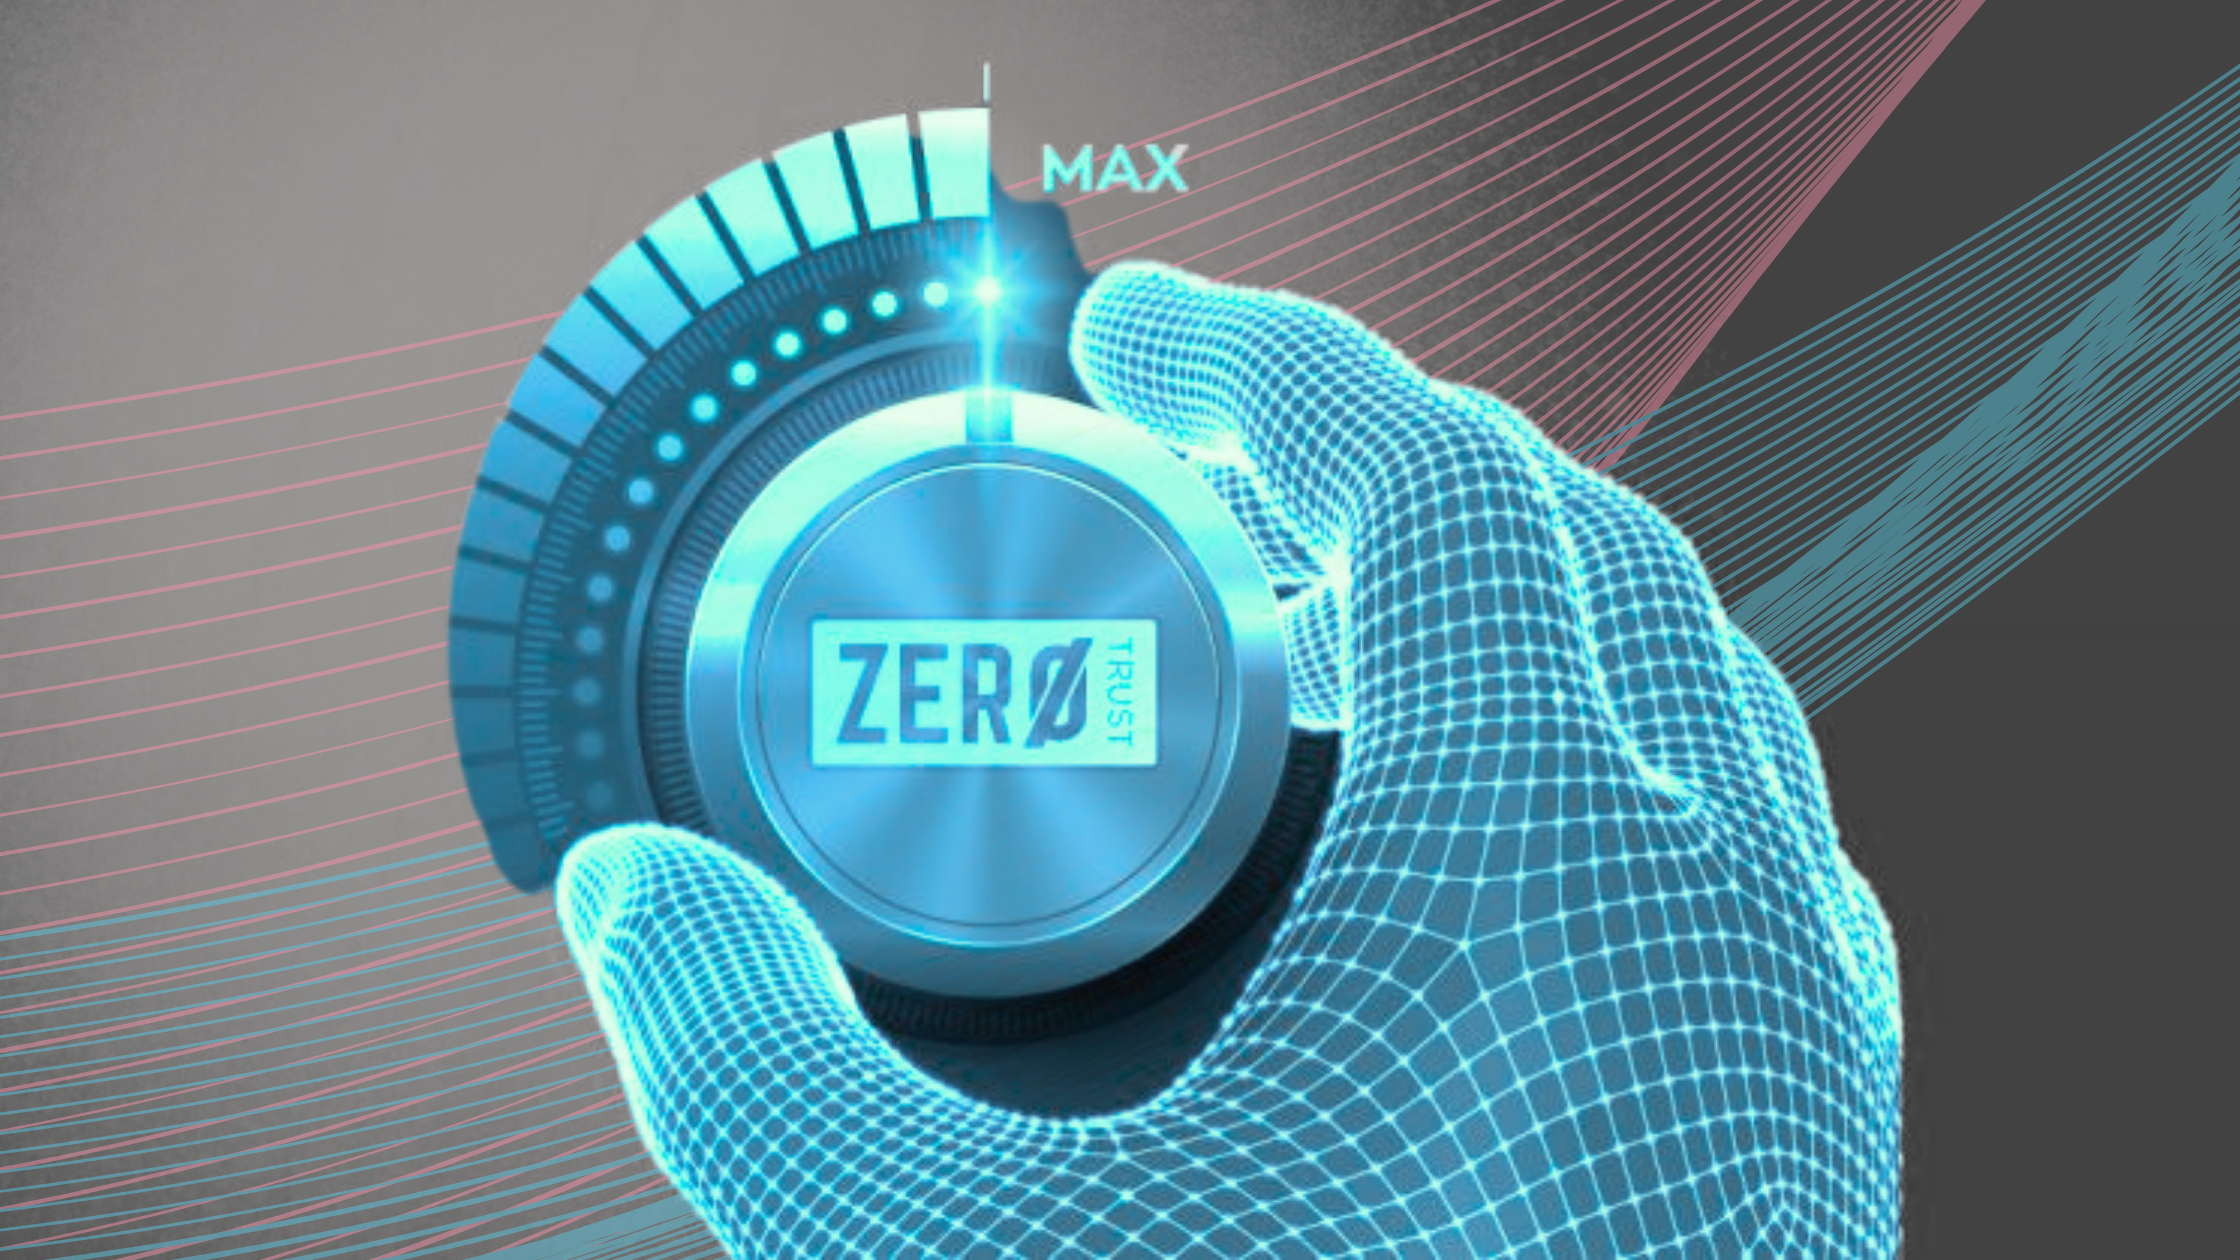 Zero trust has become the buzzword du-jour for many cybersecurity vendors, but does it actually deliver on the promises it makes? Keep reading to learn more.